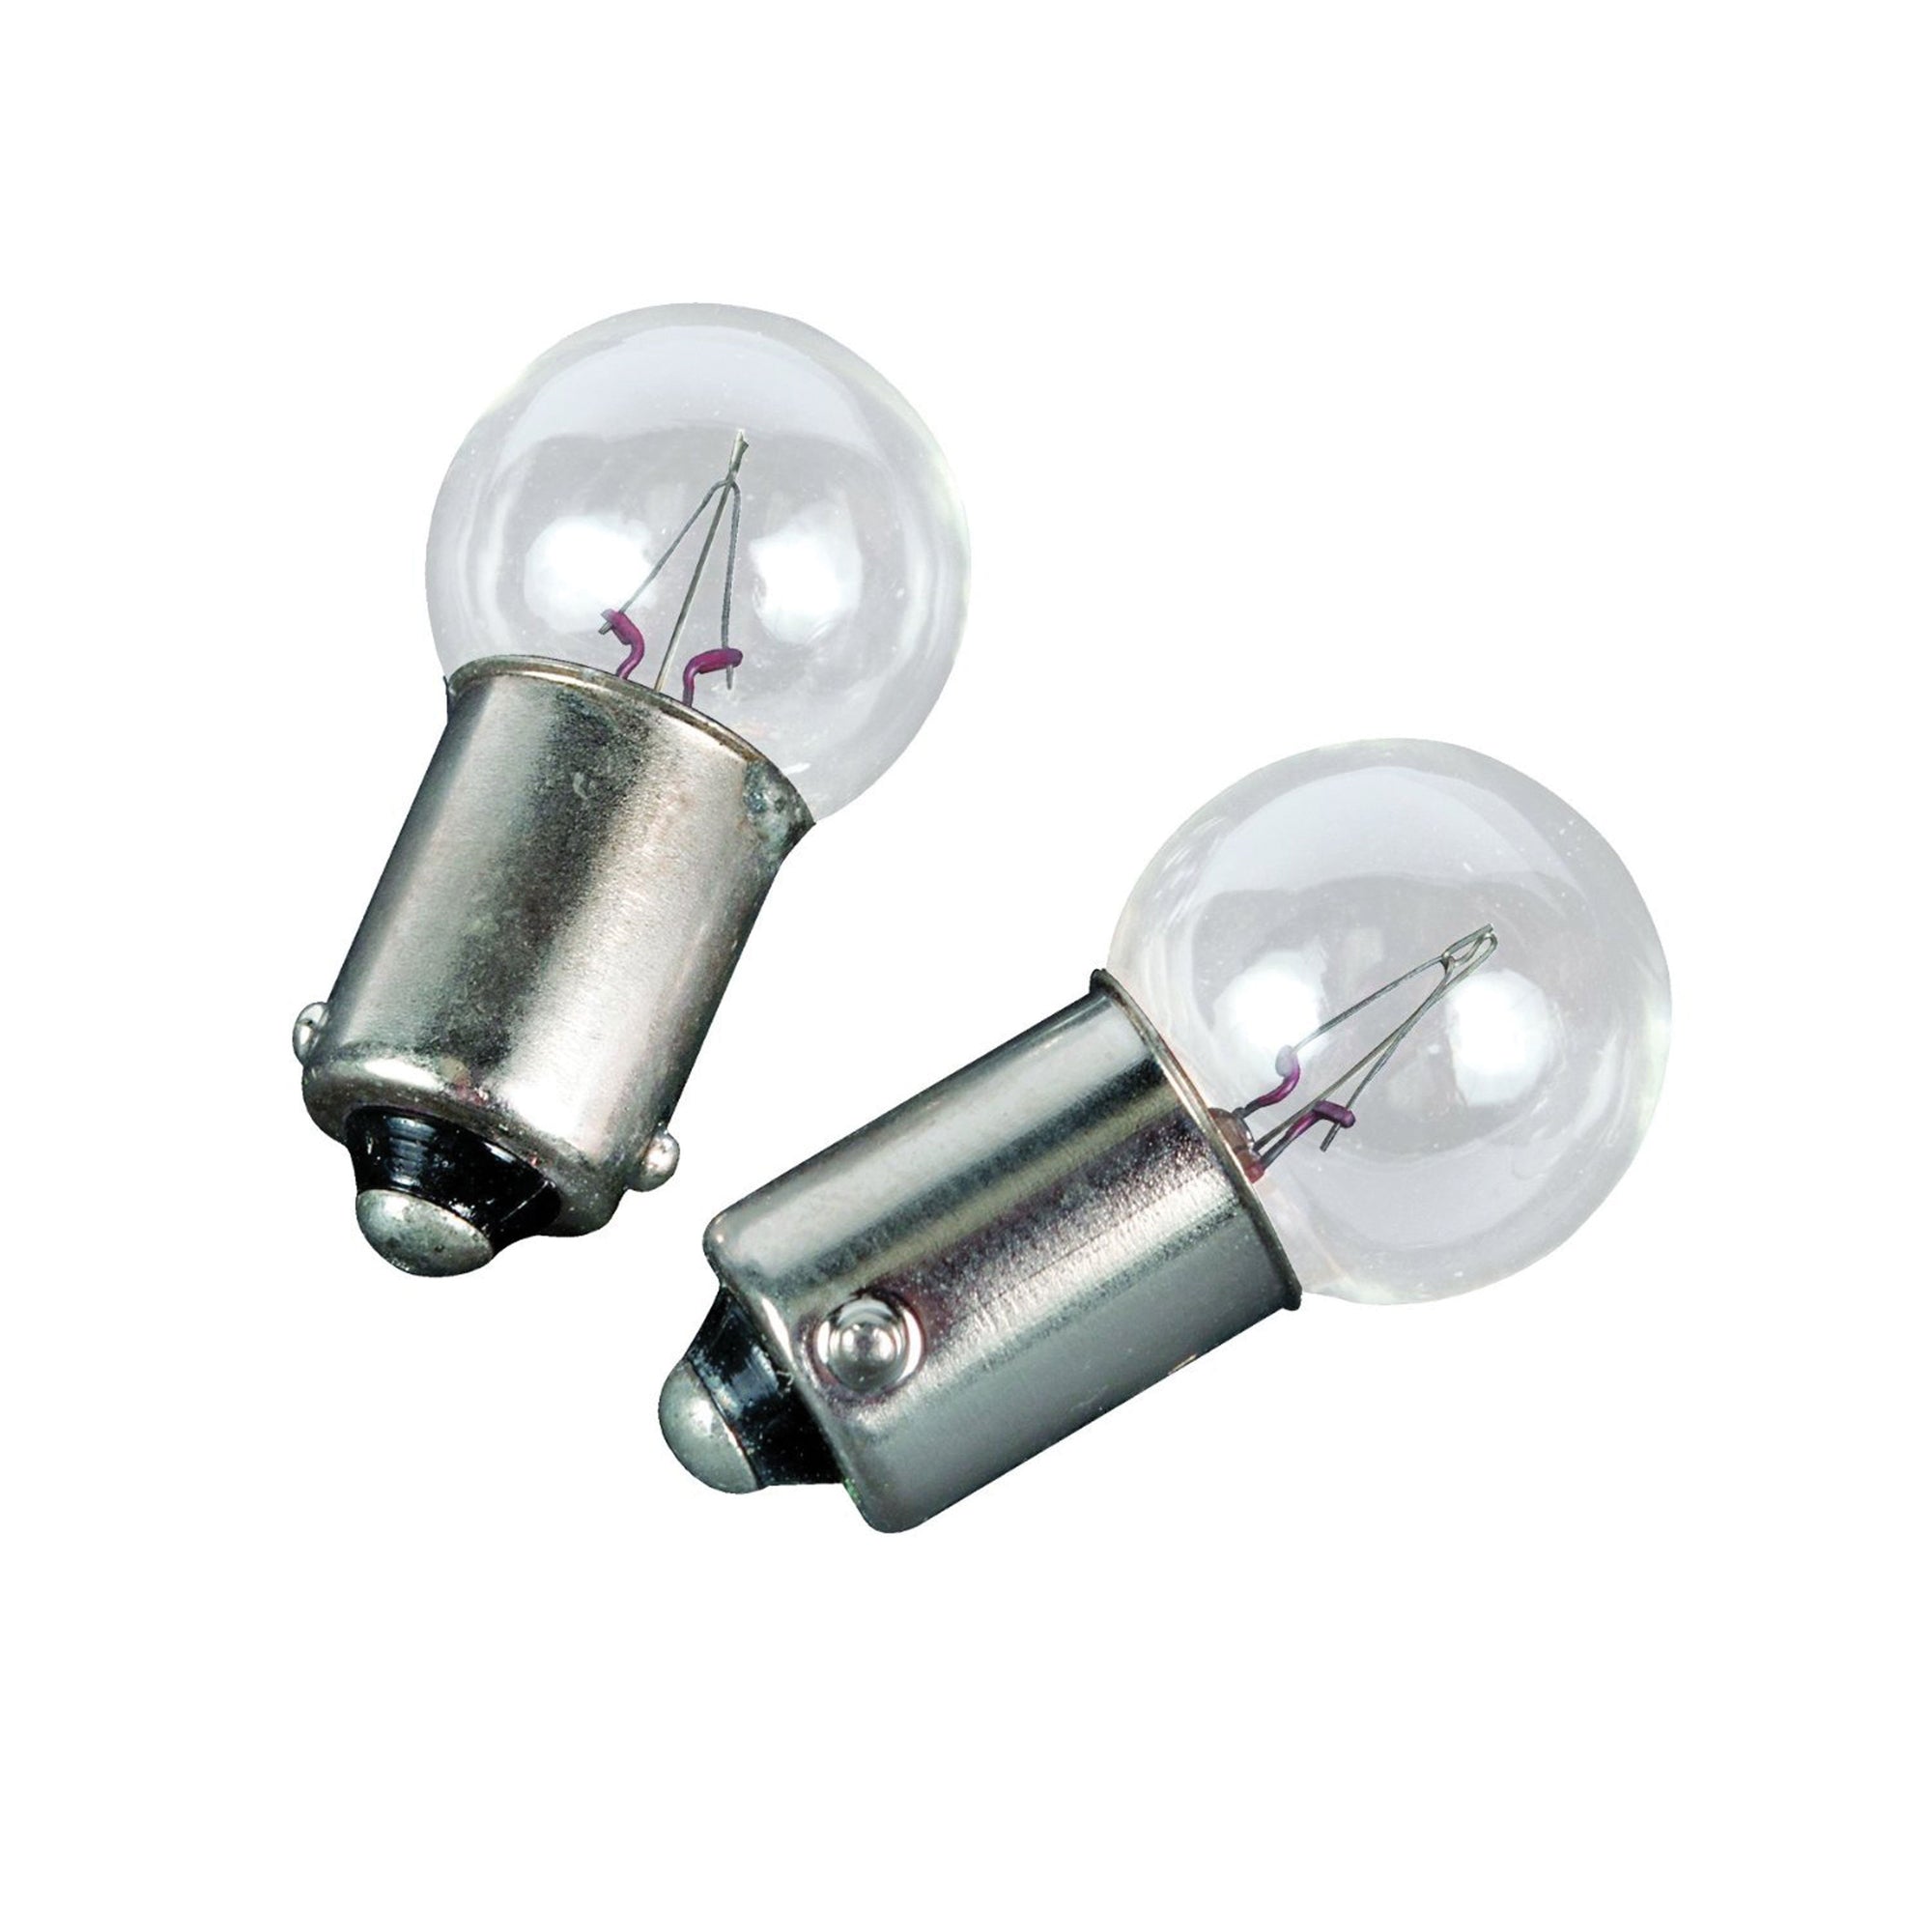 Camco 54715 Automotive Instrument Bulb #57 - Pack of 2